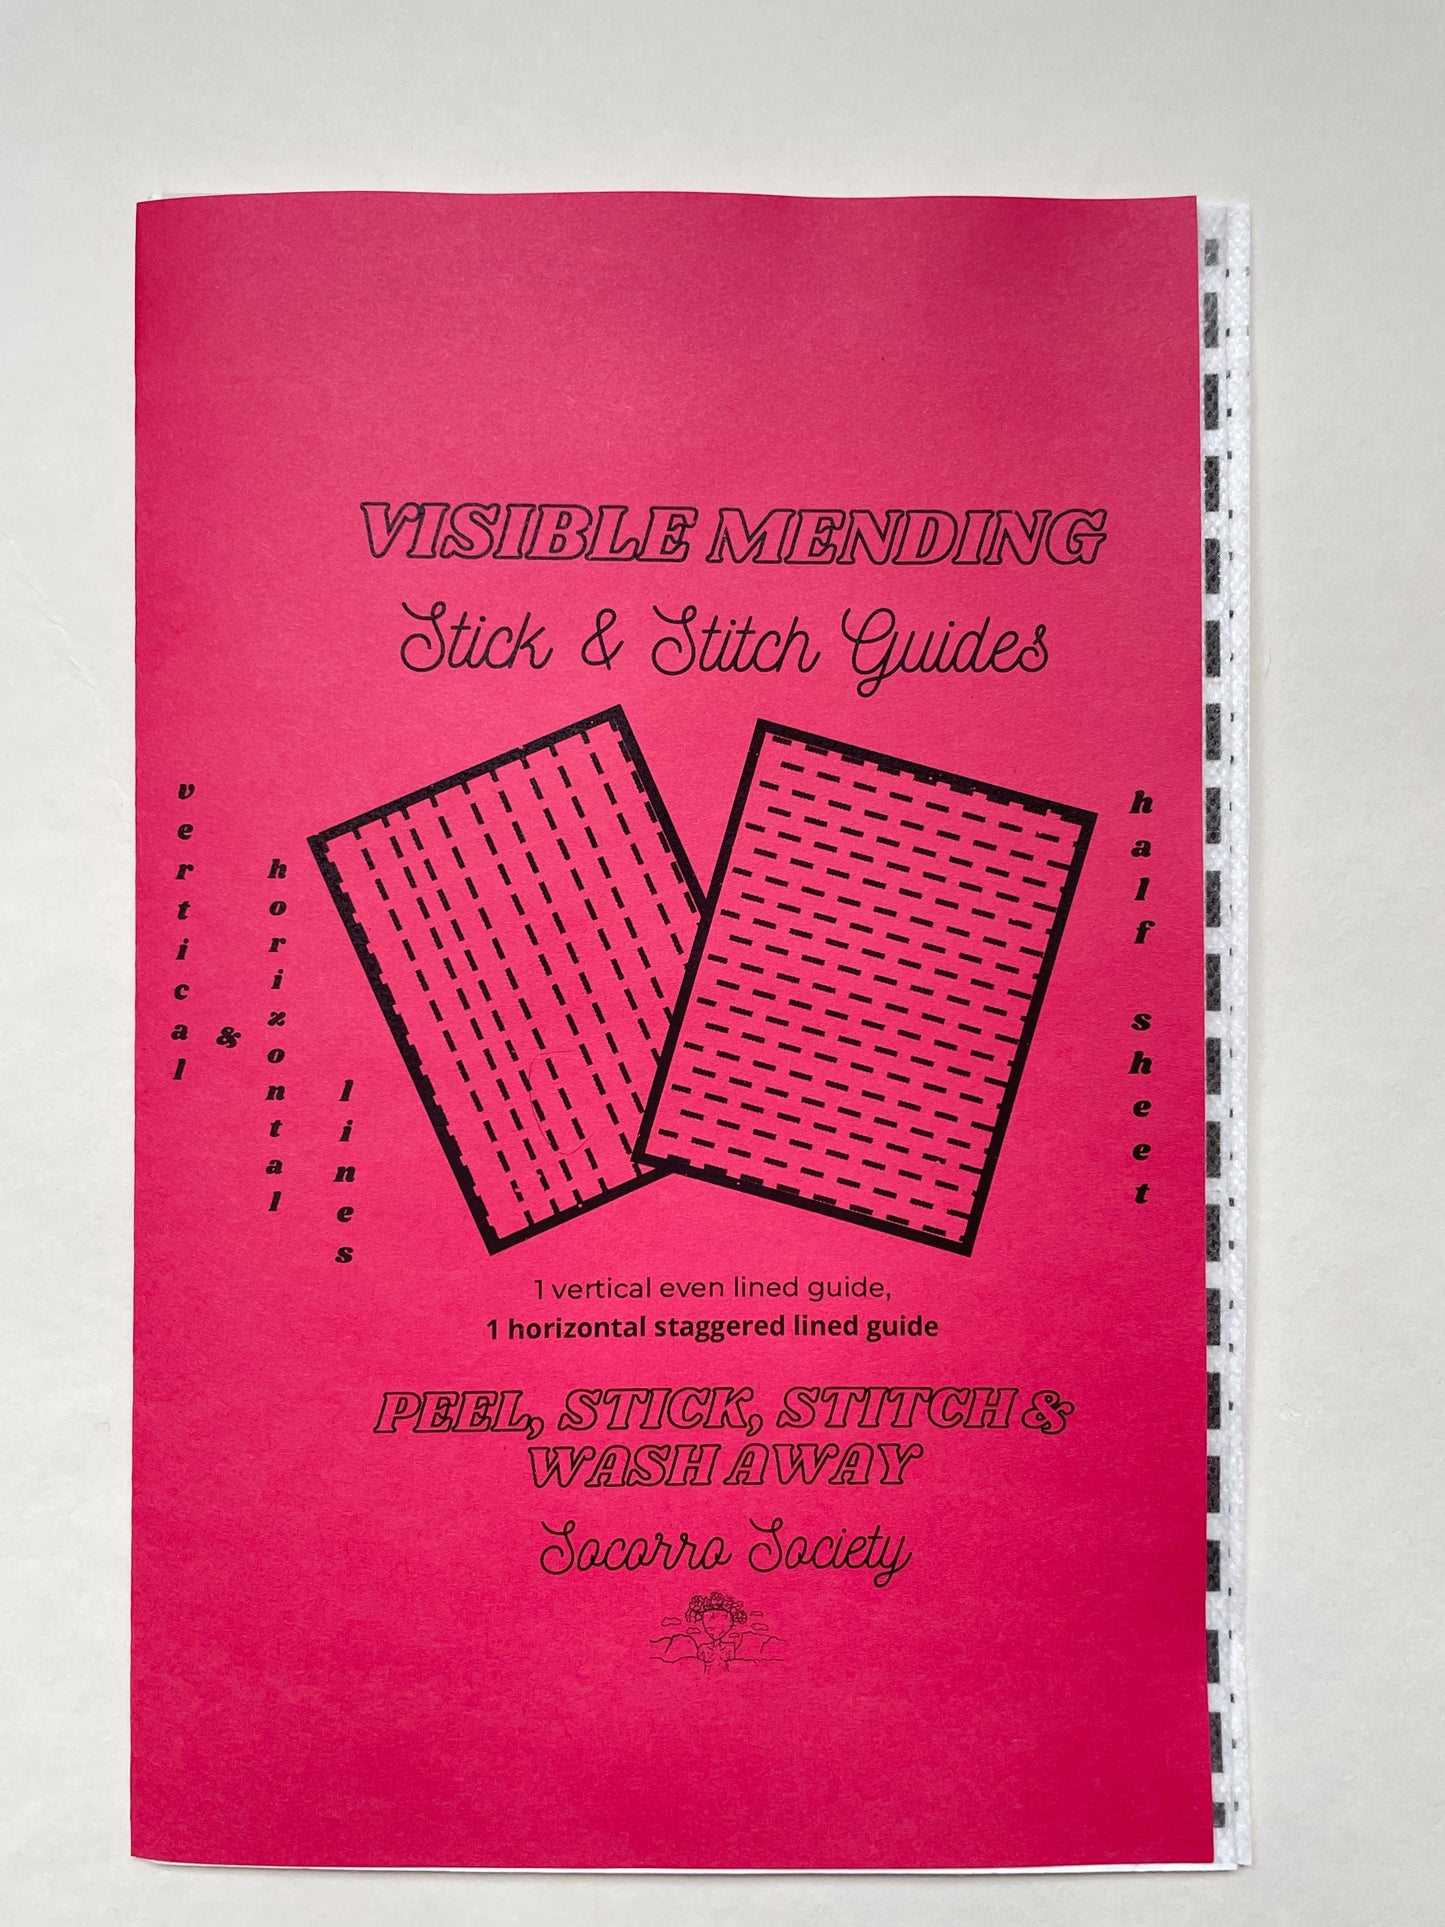 Visible Mending Lined Stick & Stitch Guides